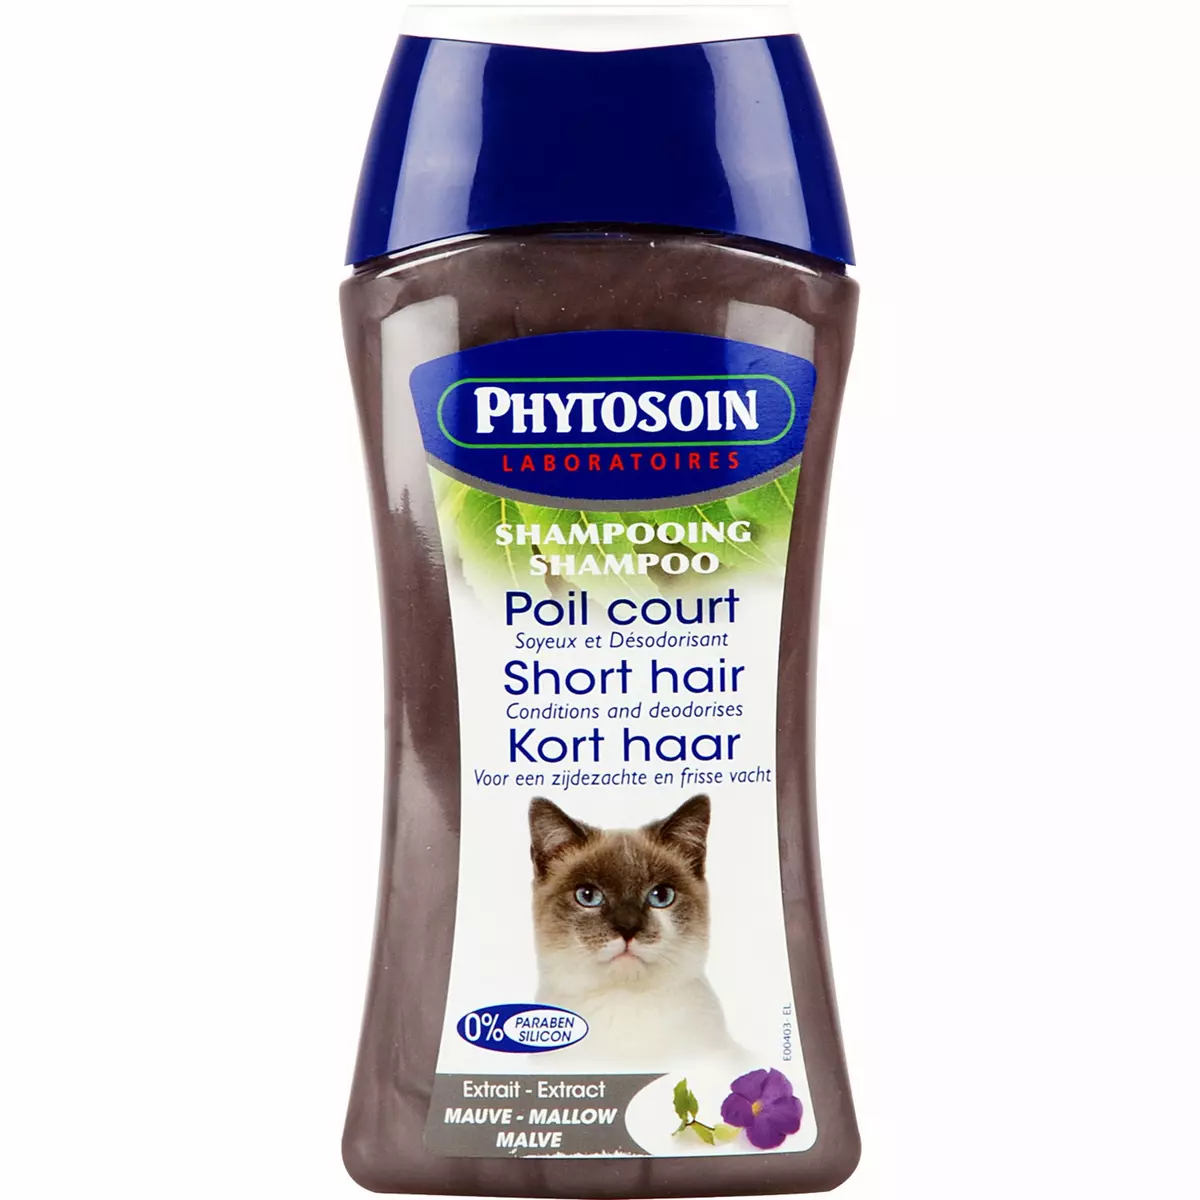 PHYTOSOIN Phytosoin shampooing spécial pour chat 250ml